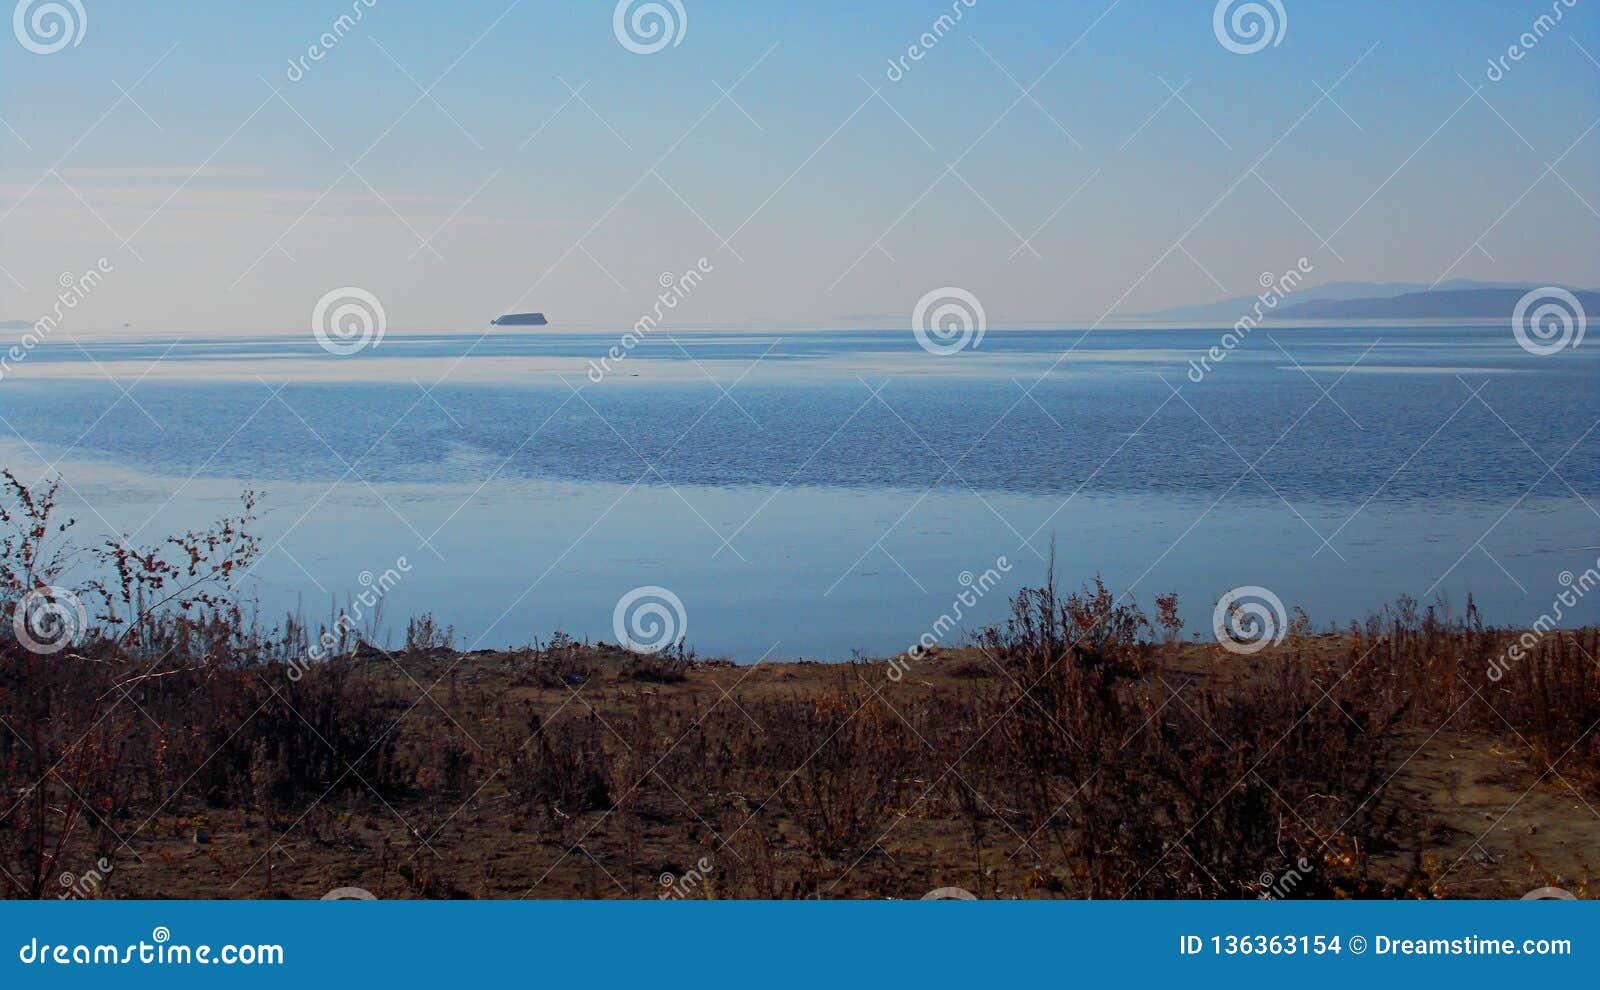 Black Sea Beach Nude - The Ocean Merges With The Sky. Winter. Naked Beach. Blue Ice ...